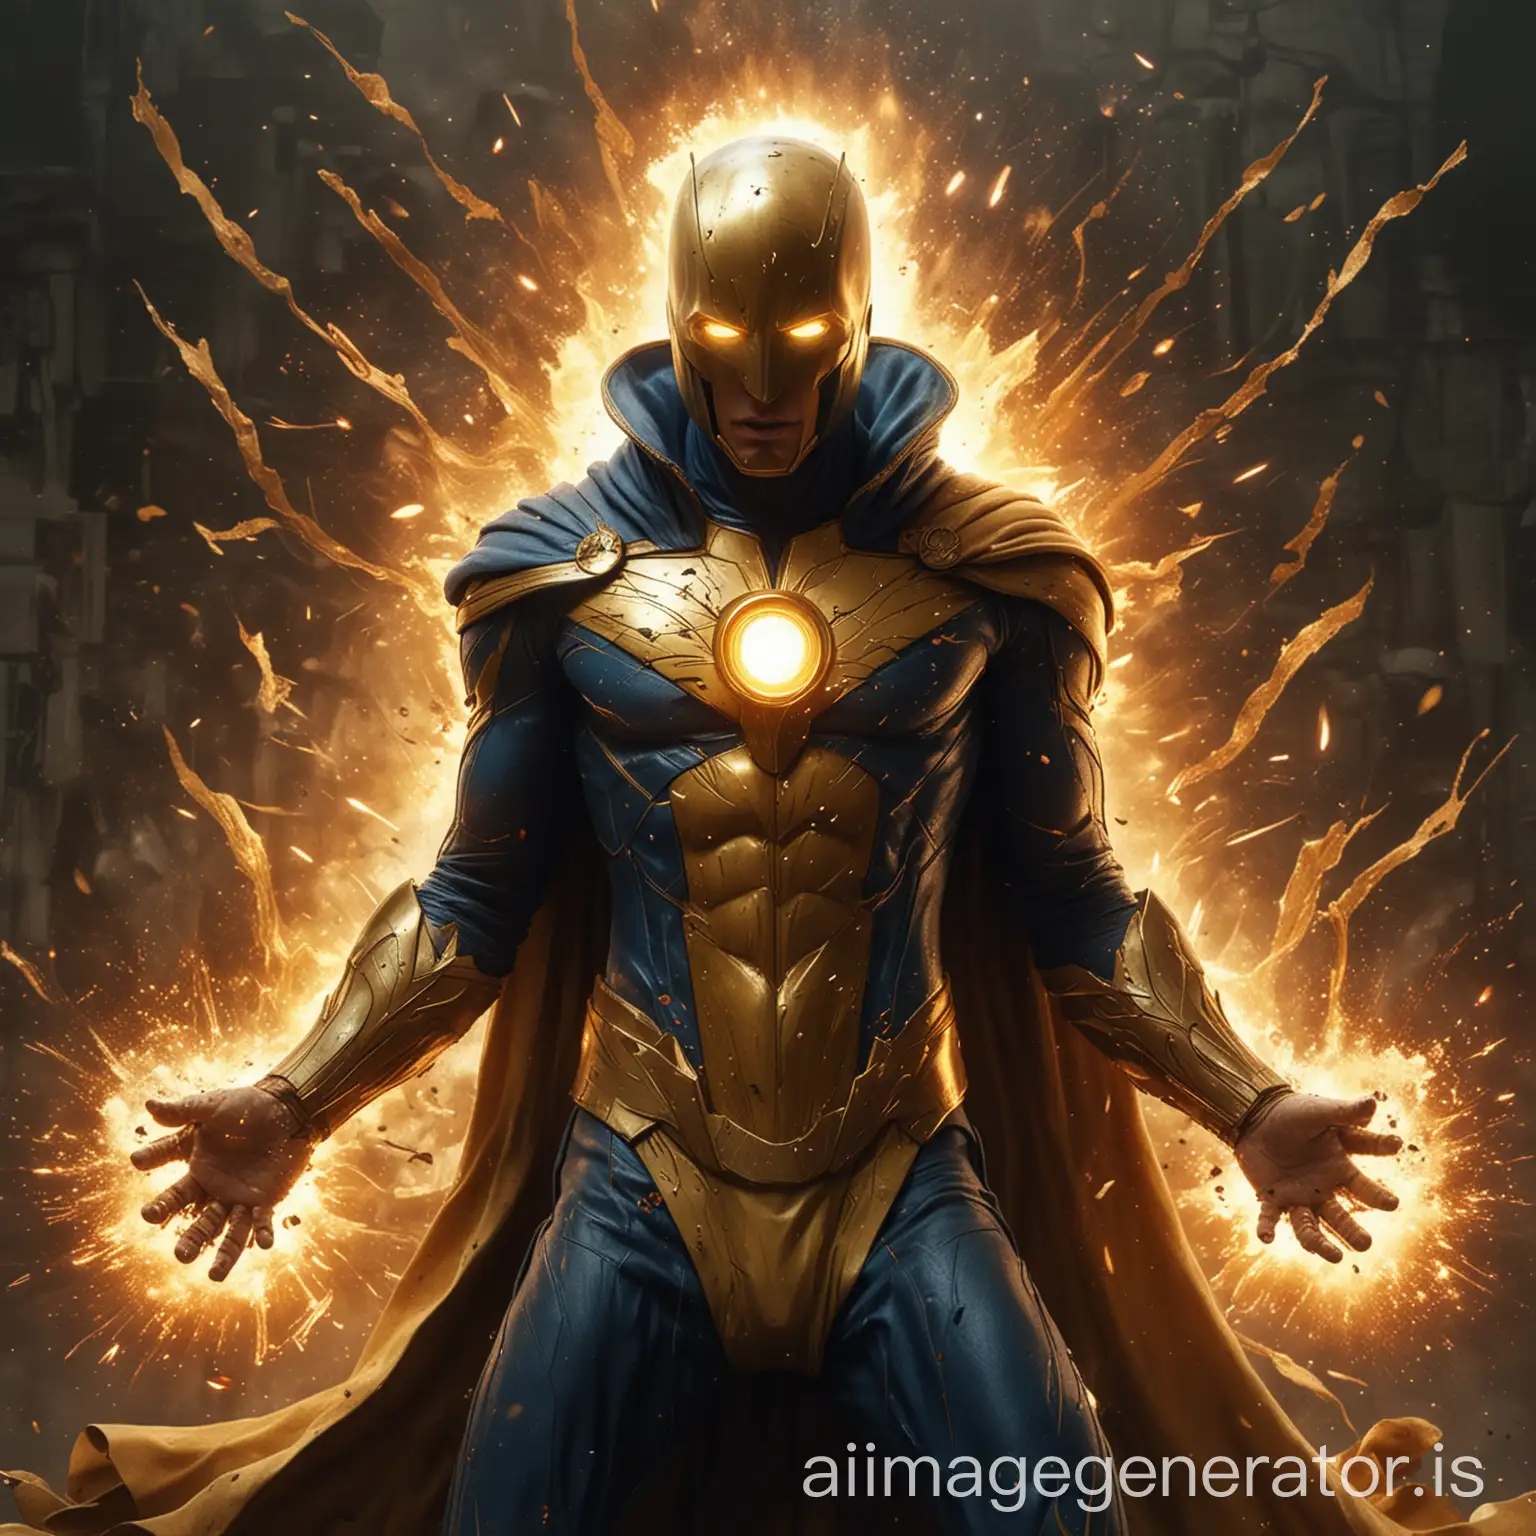 Draw the DC character Doctor Fate with an explosion behind him and get it in realistic and cinematic art form.